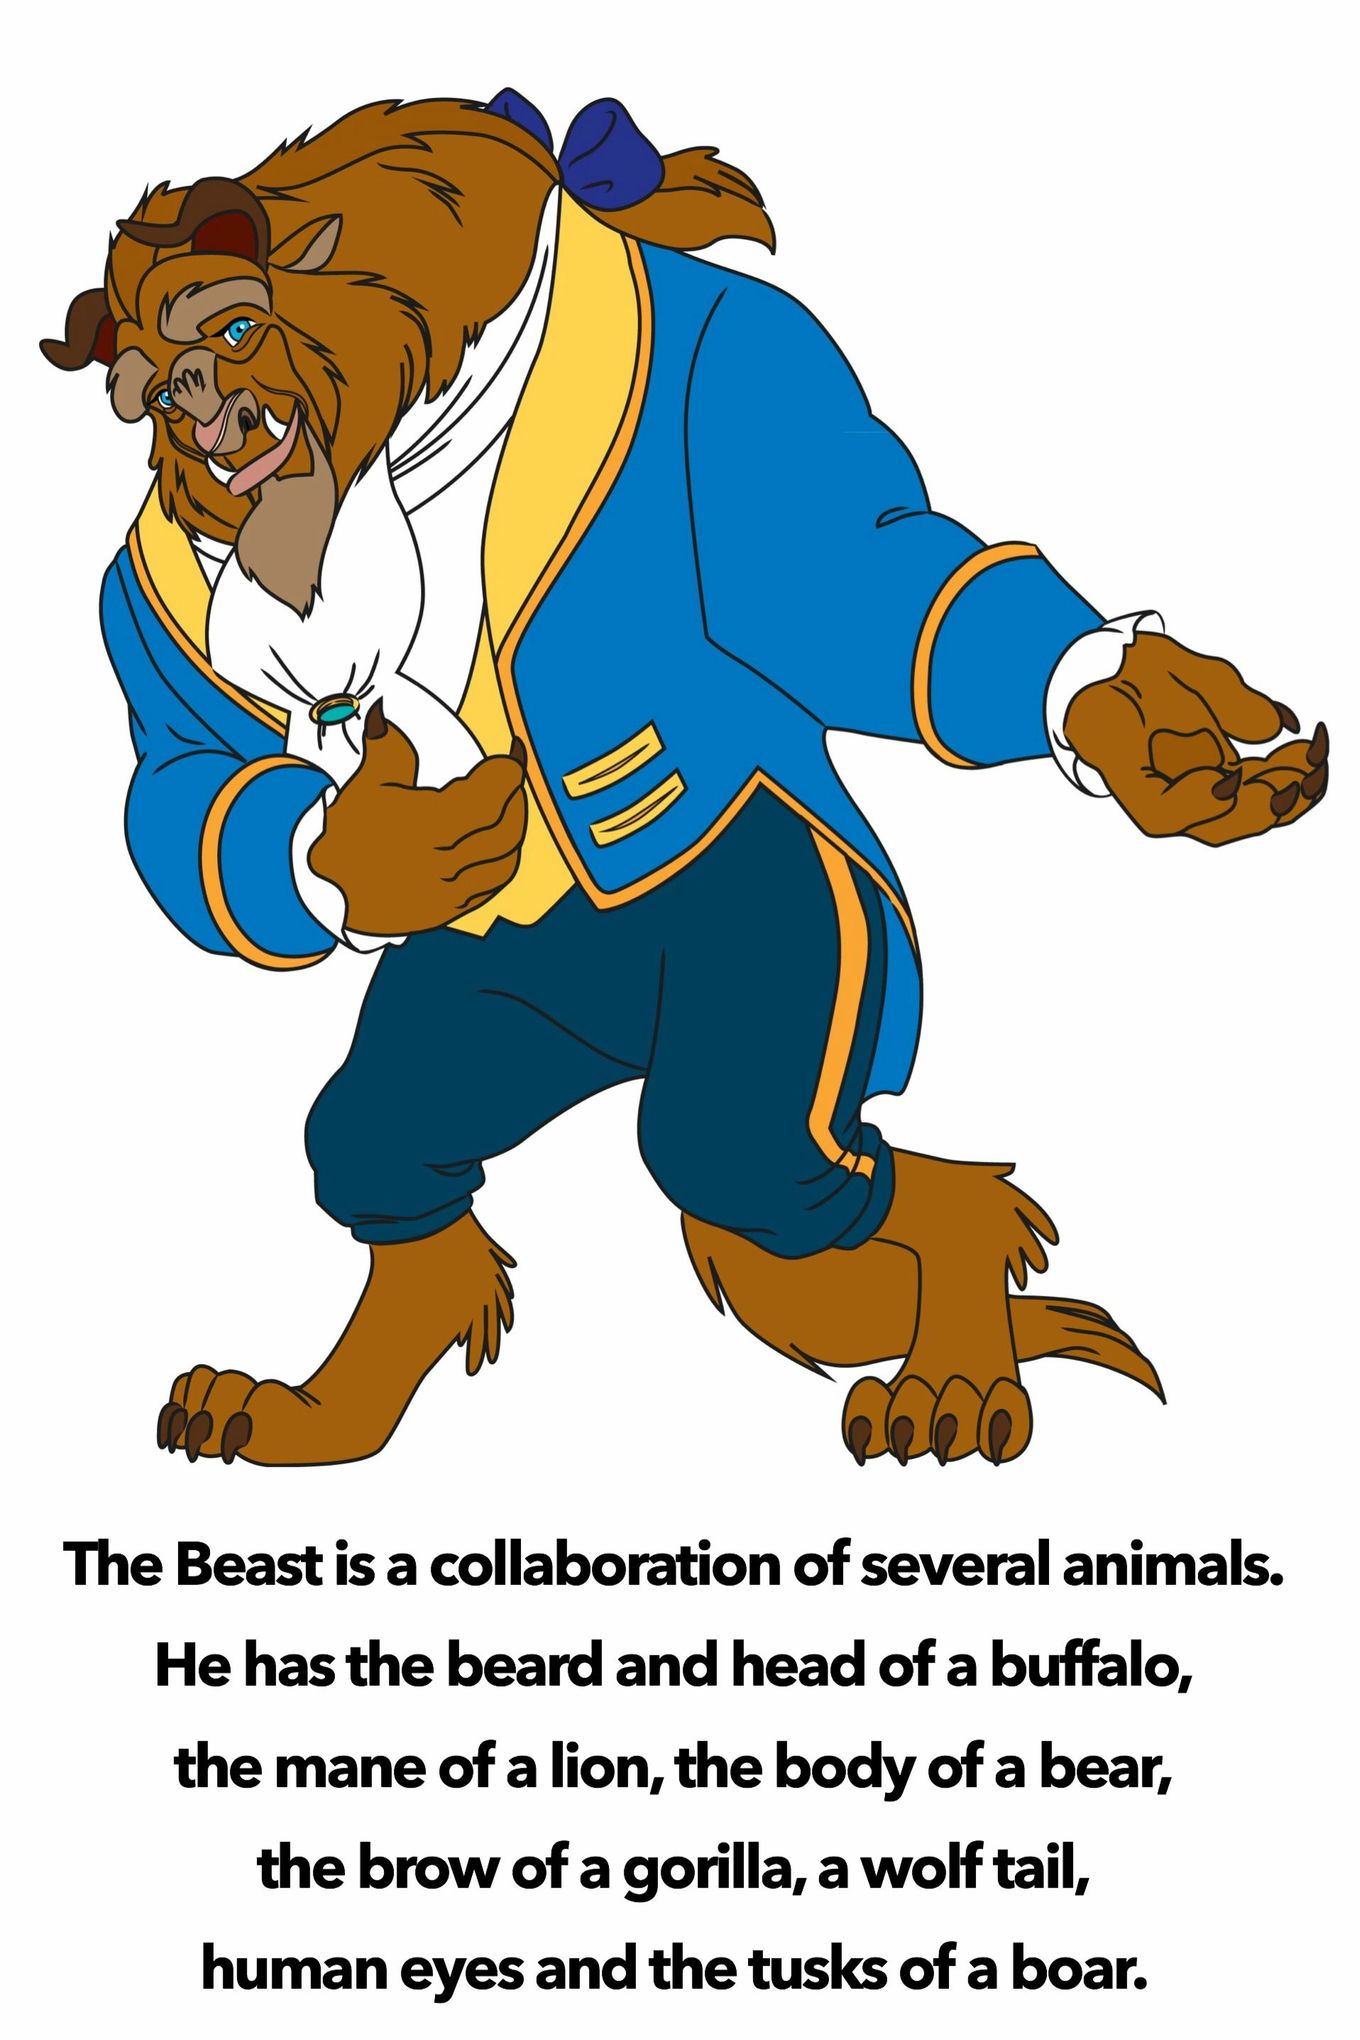 beast from beauty and the beast - The Beast is a collaboration of several animals. He has the beard and head of a buffalo, the mane of a lion, the body of a bear, the brow of a gorilla, a wolf tail, human eyes and the tusks of a boar.